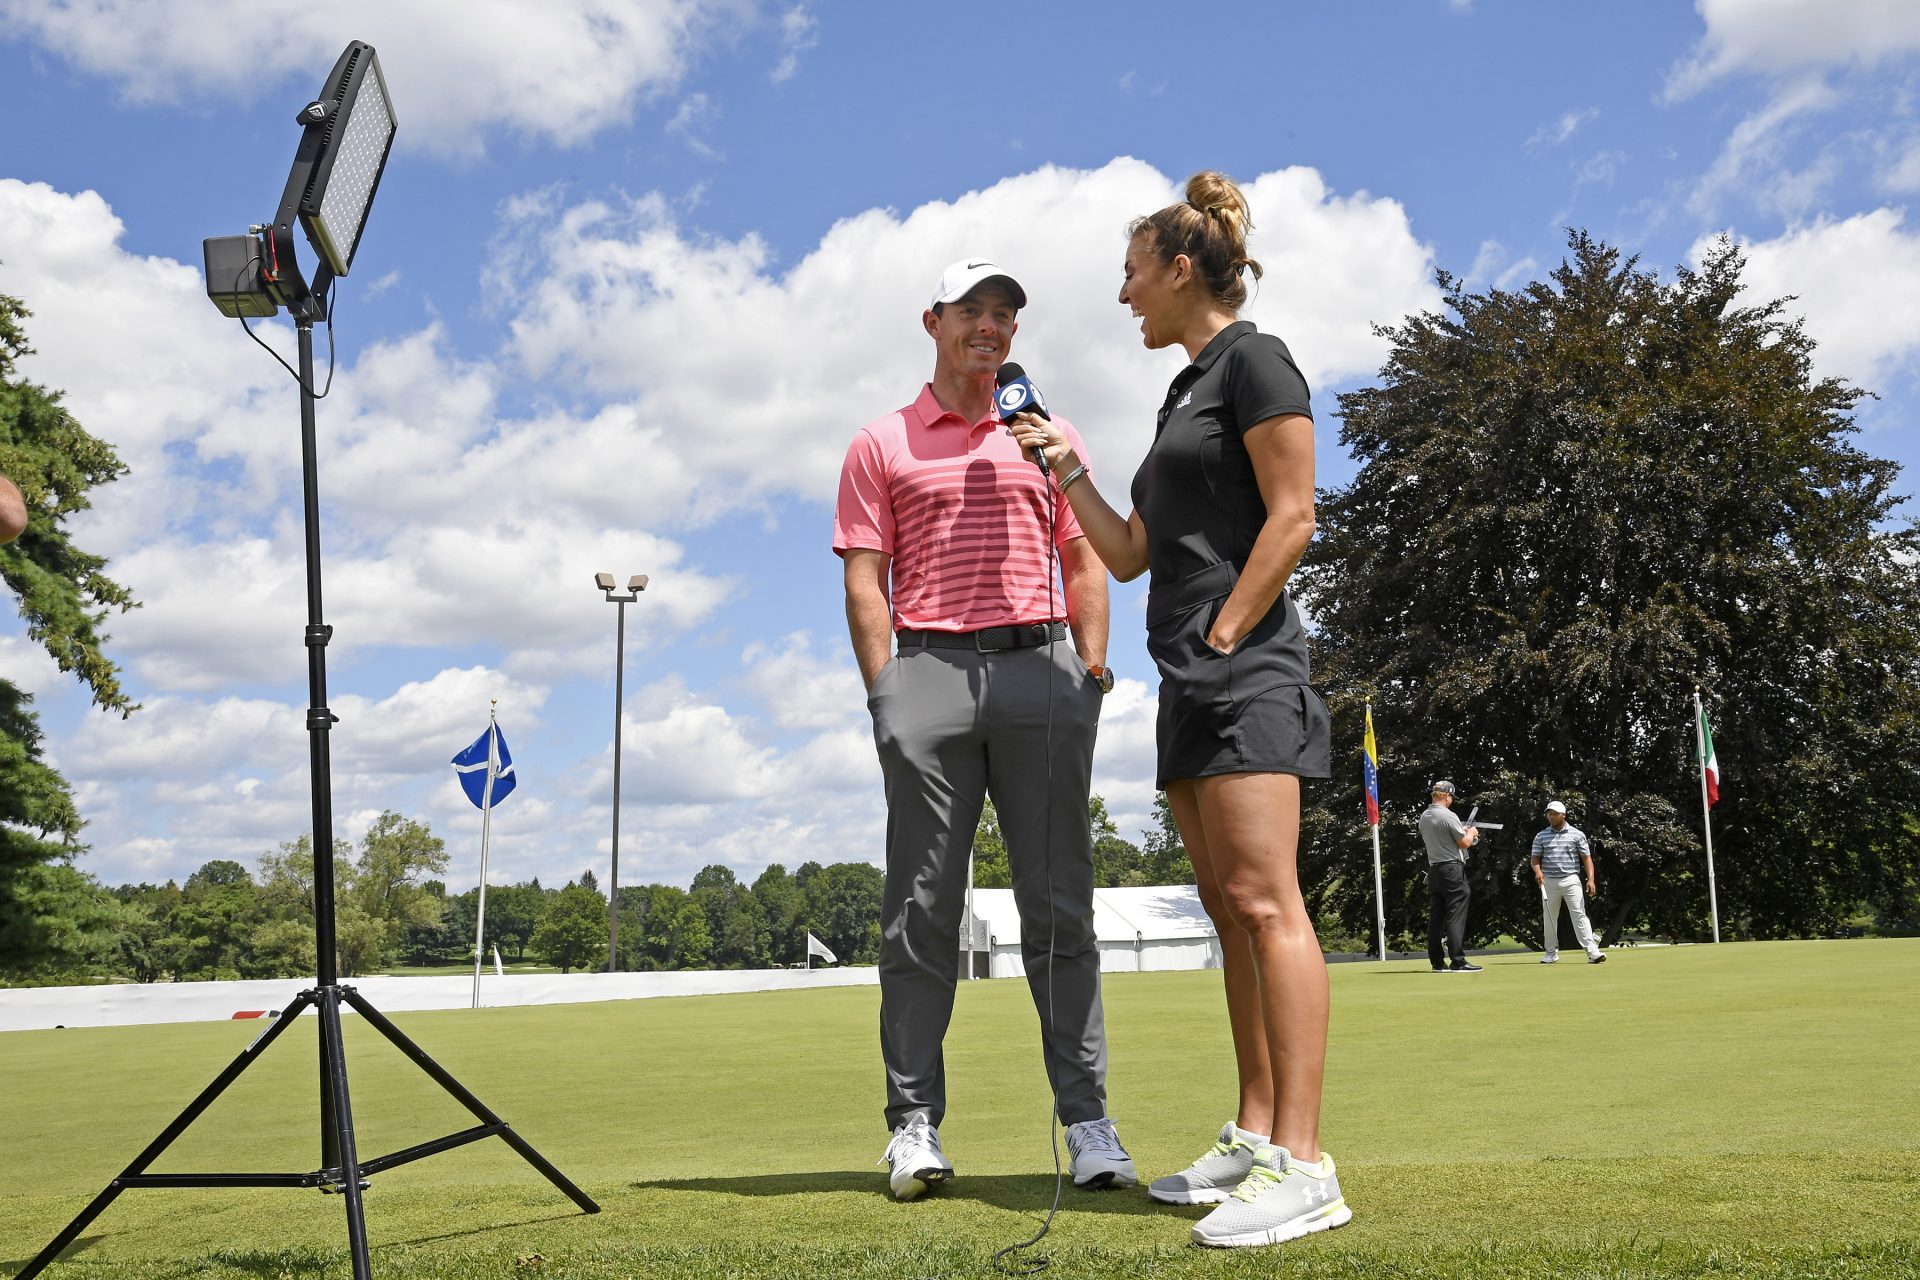 Amanda Balionis, the reporter rumoured to be with golf superstar Rory McIlroy